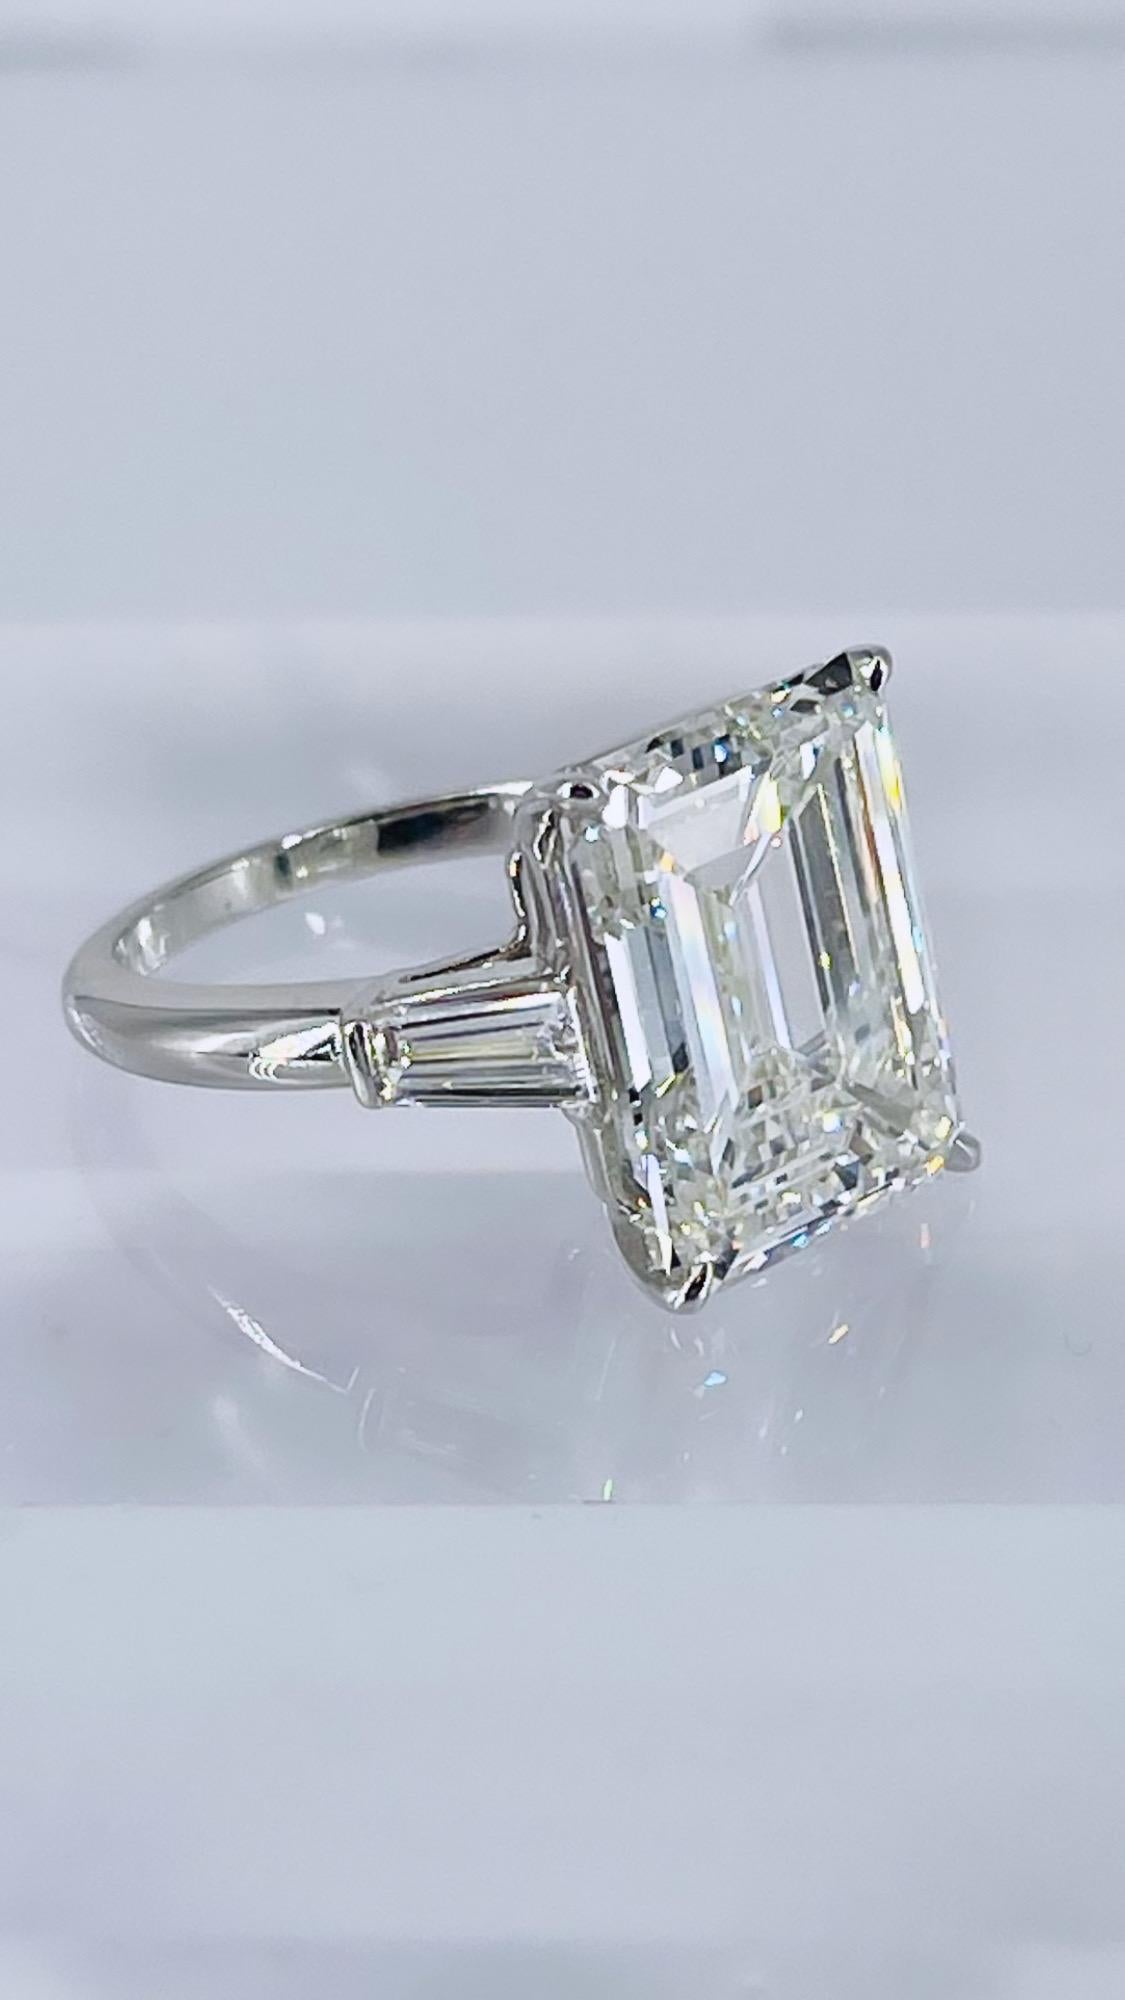 This exquisite piece by J. Birnbach evokes timeless glamour and elegance. The ring features a 8.48 carat GIA certified emerald cut diamond, J color and VS2 clarity as described by GIA report #6214726183. The diamond's classic proportion offers